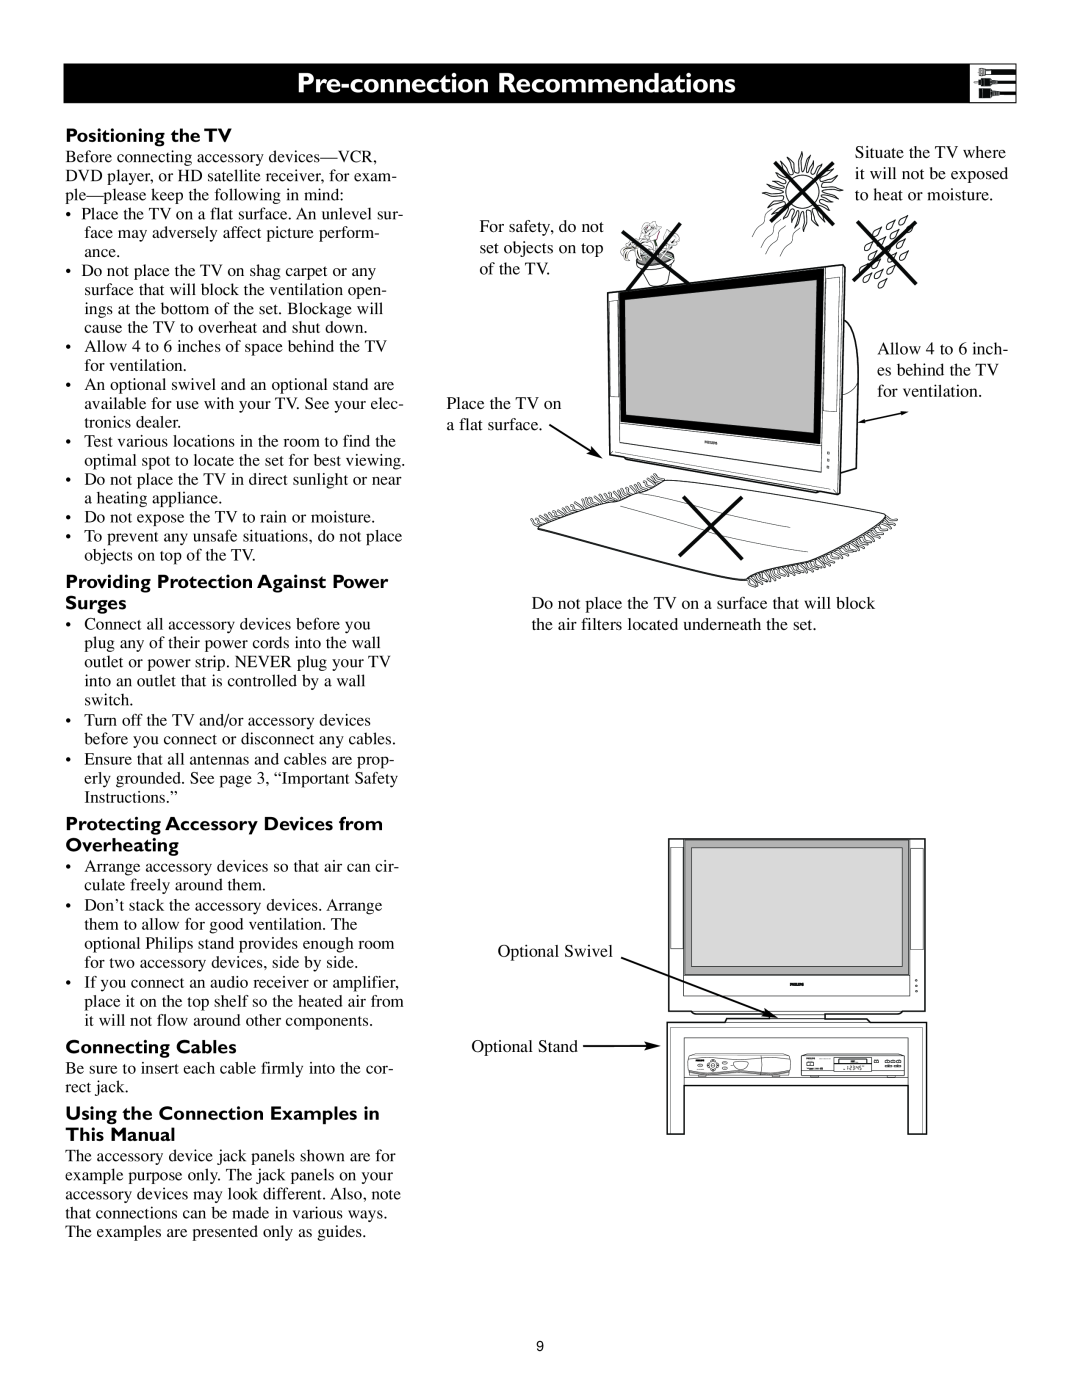 Philips 55PL9524, 62PL9524 Pre-connection Recommendations, Positioning the TV, Providing Protection Against Power Surges 